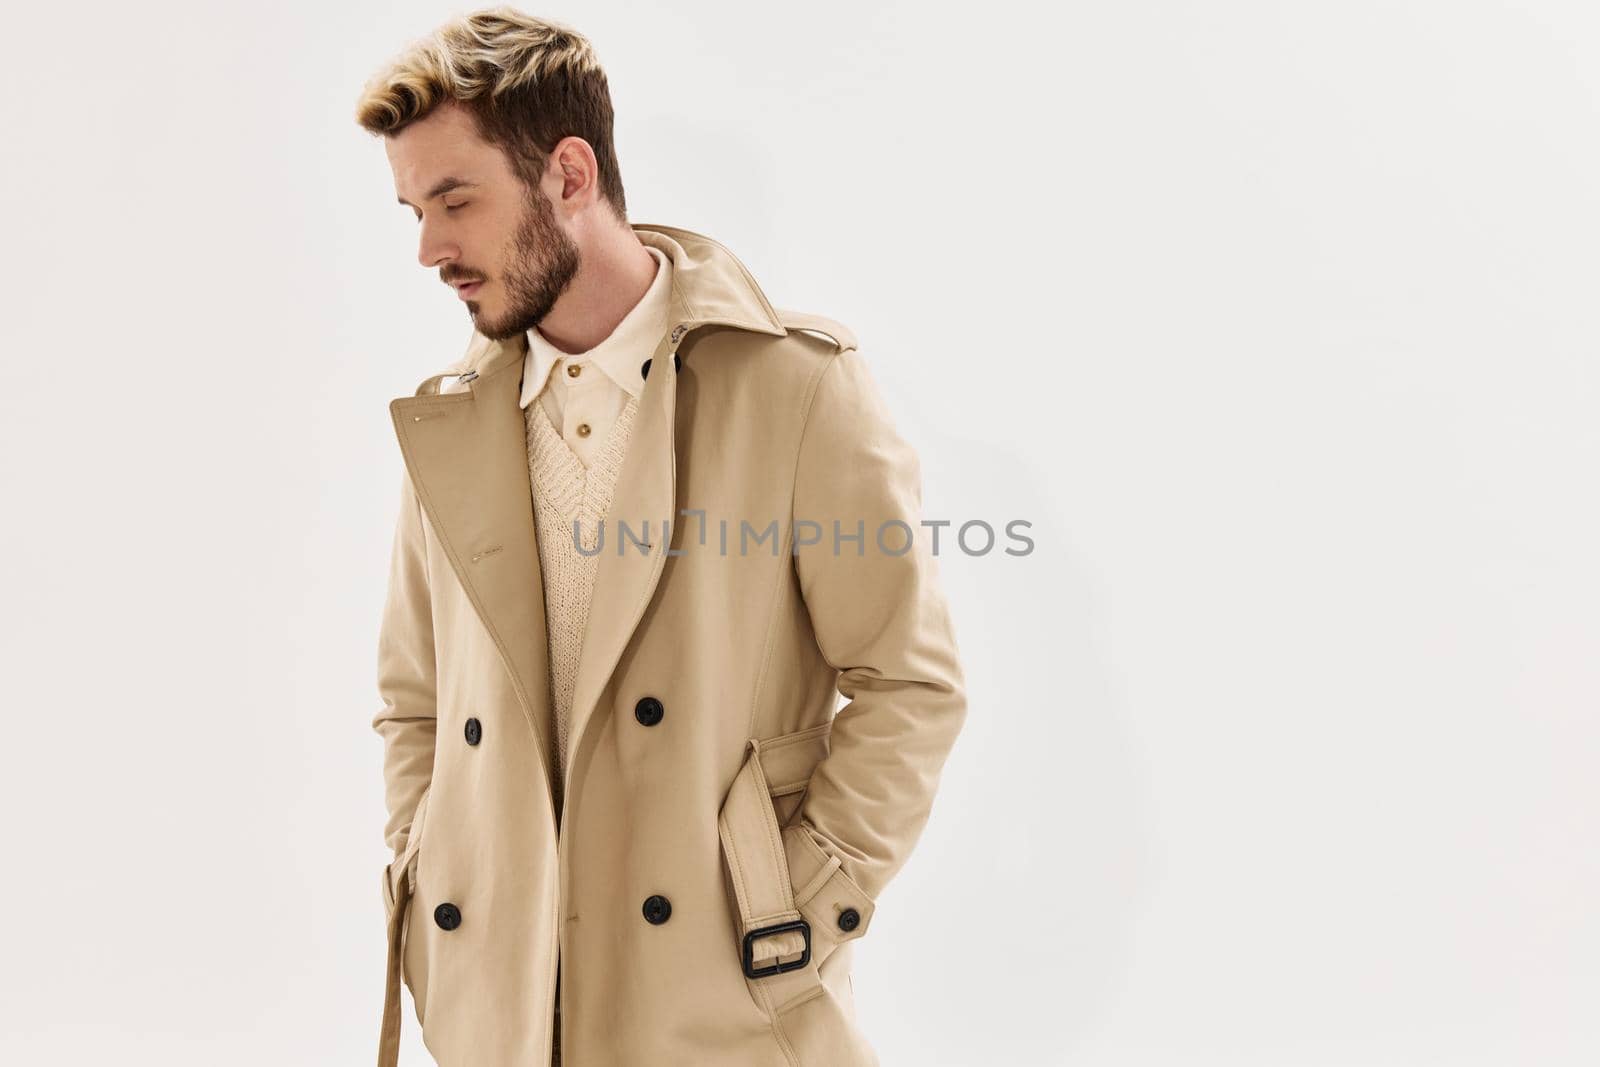 man in coat hands in pocket side view hairstyle modern style by SHOTPRIME